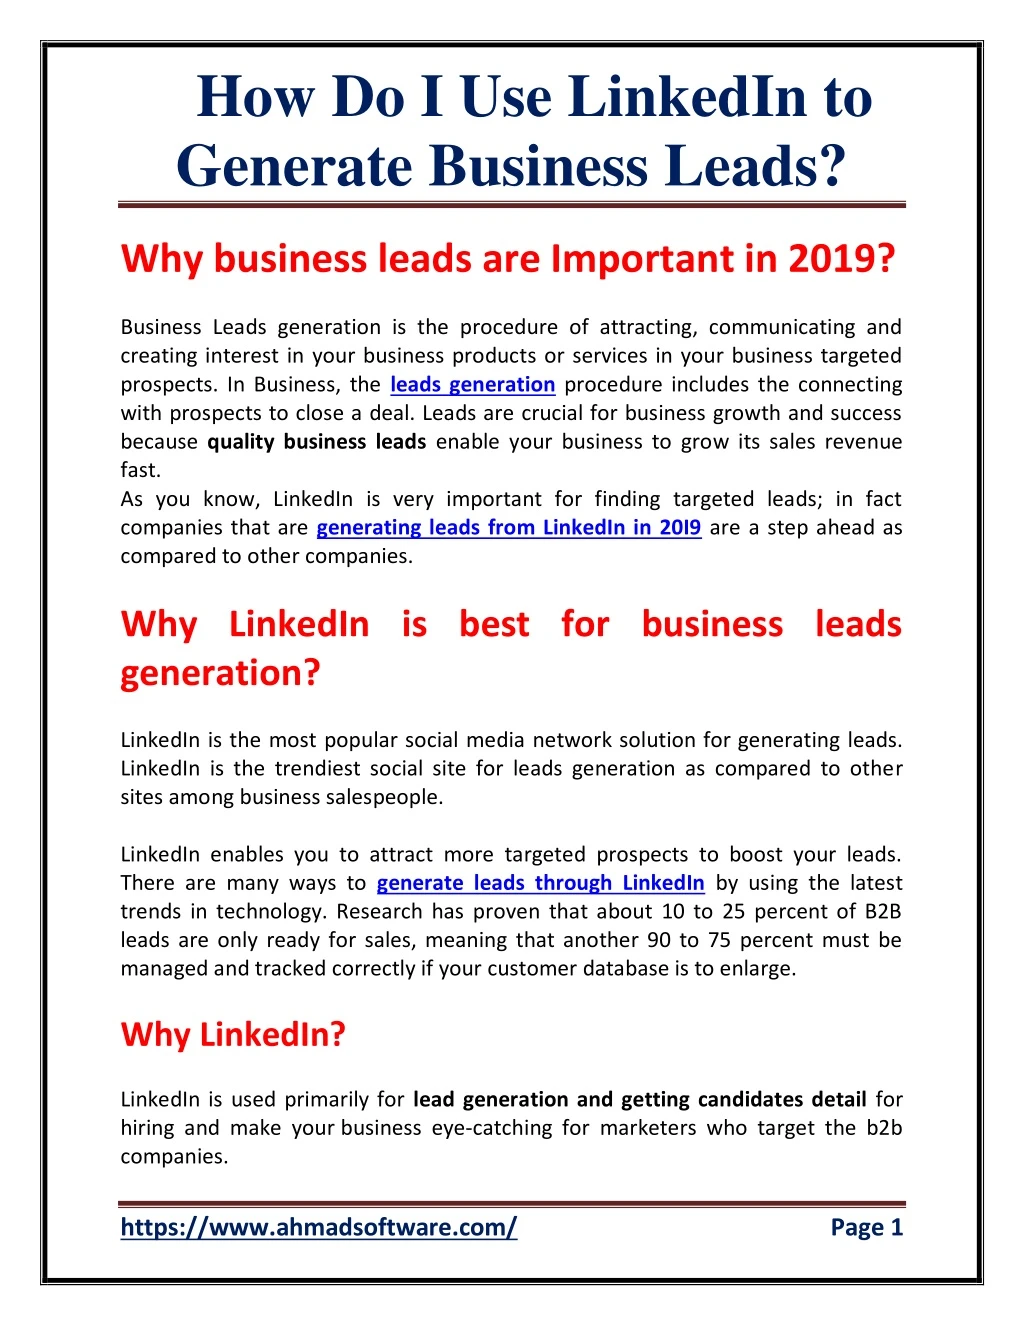 how do i use linkedin to generate business leads